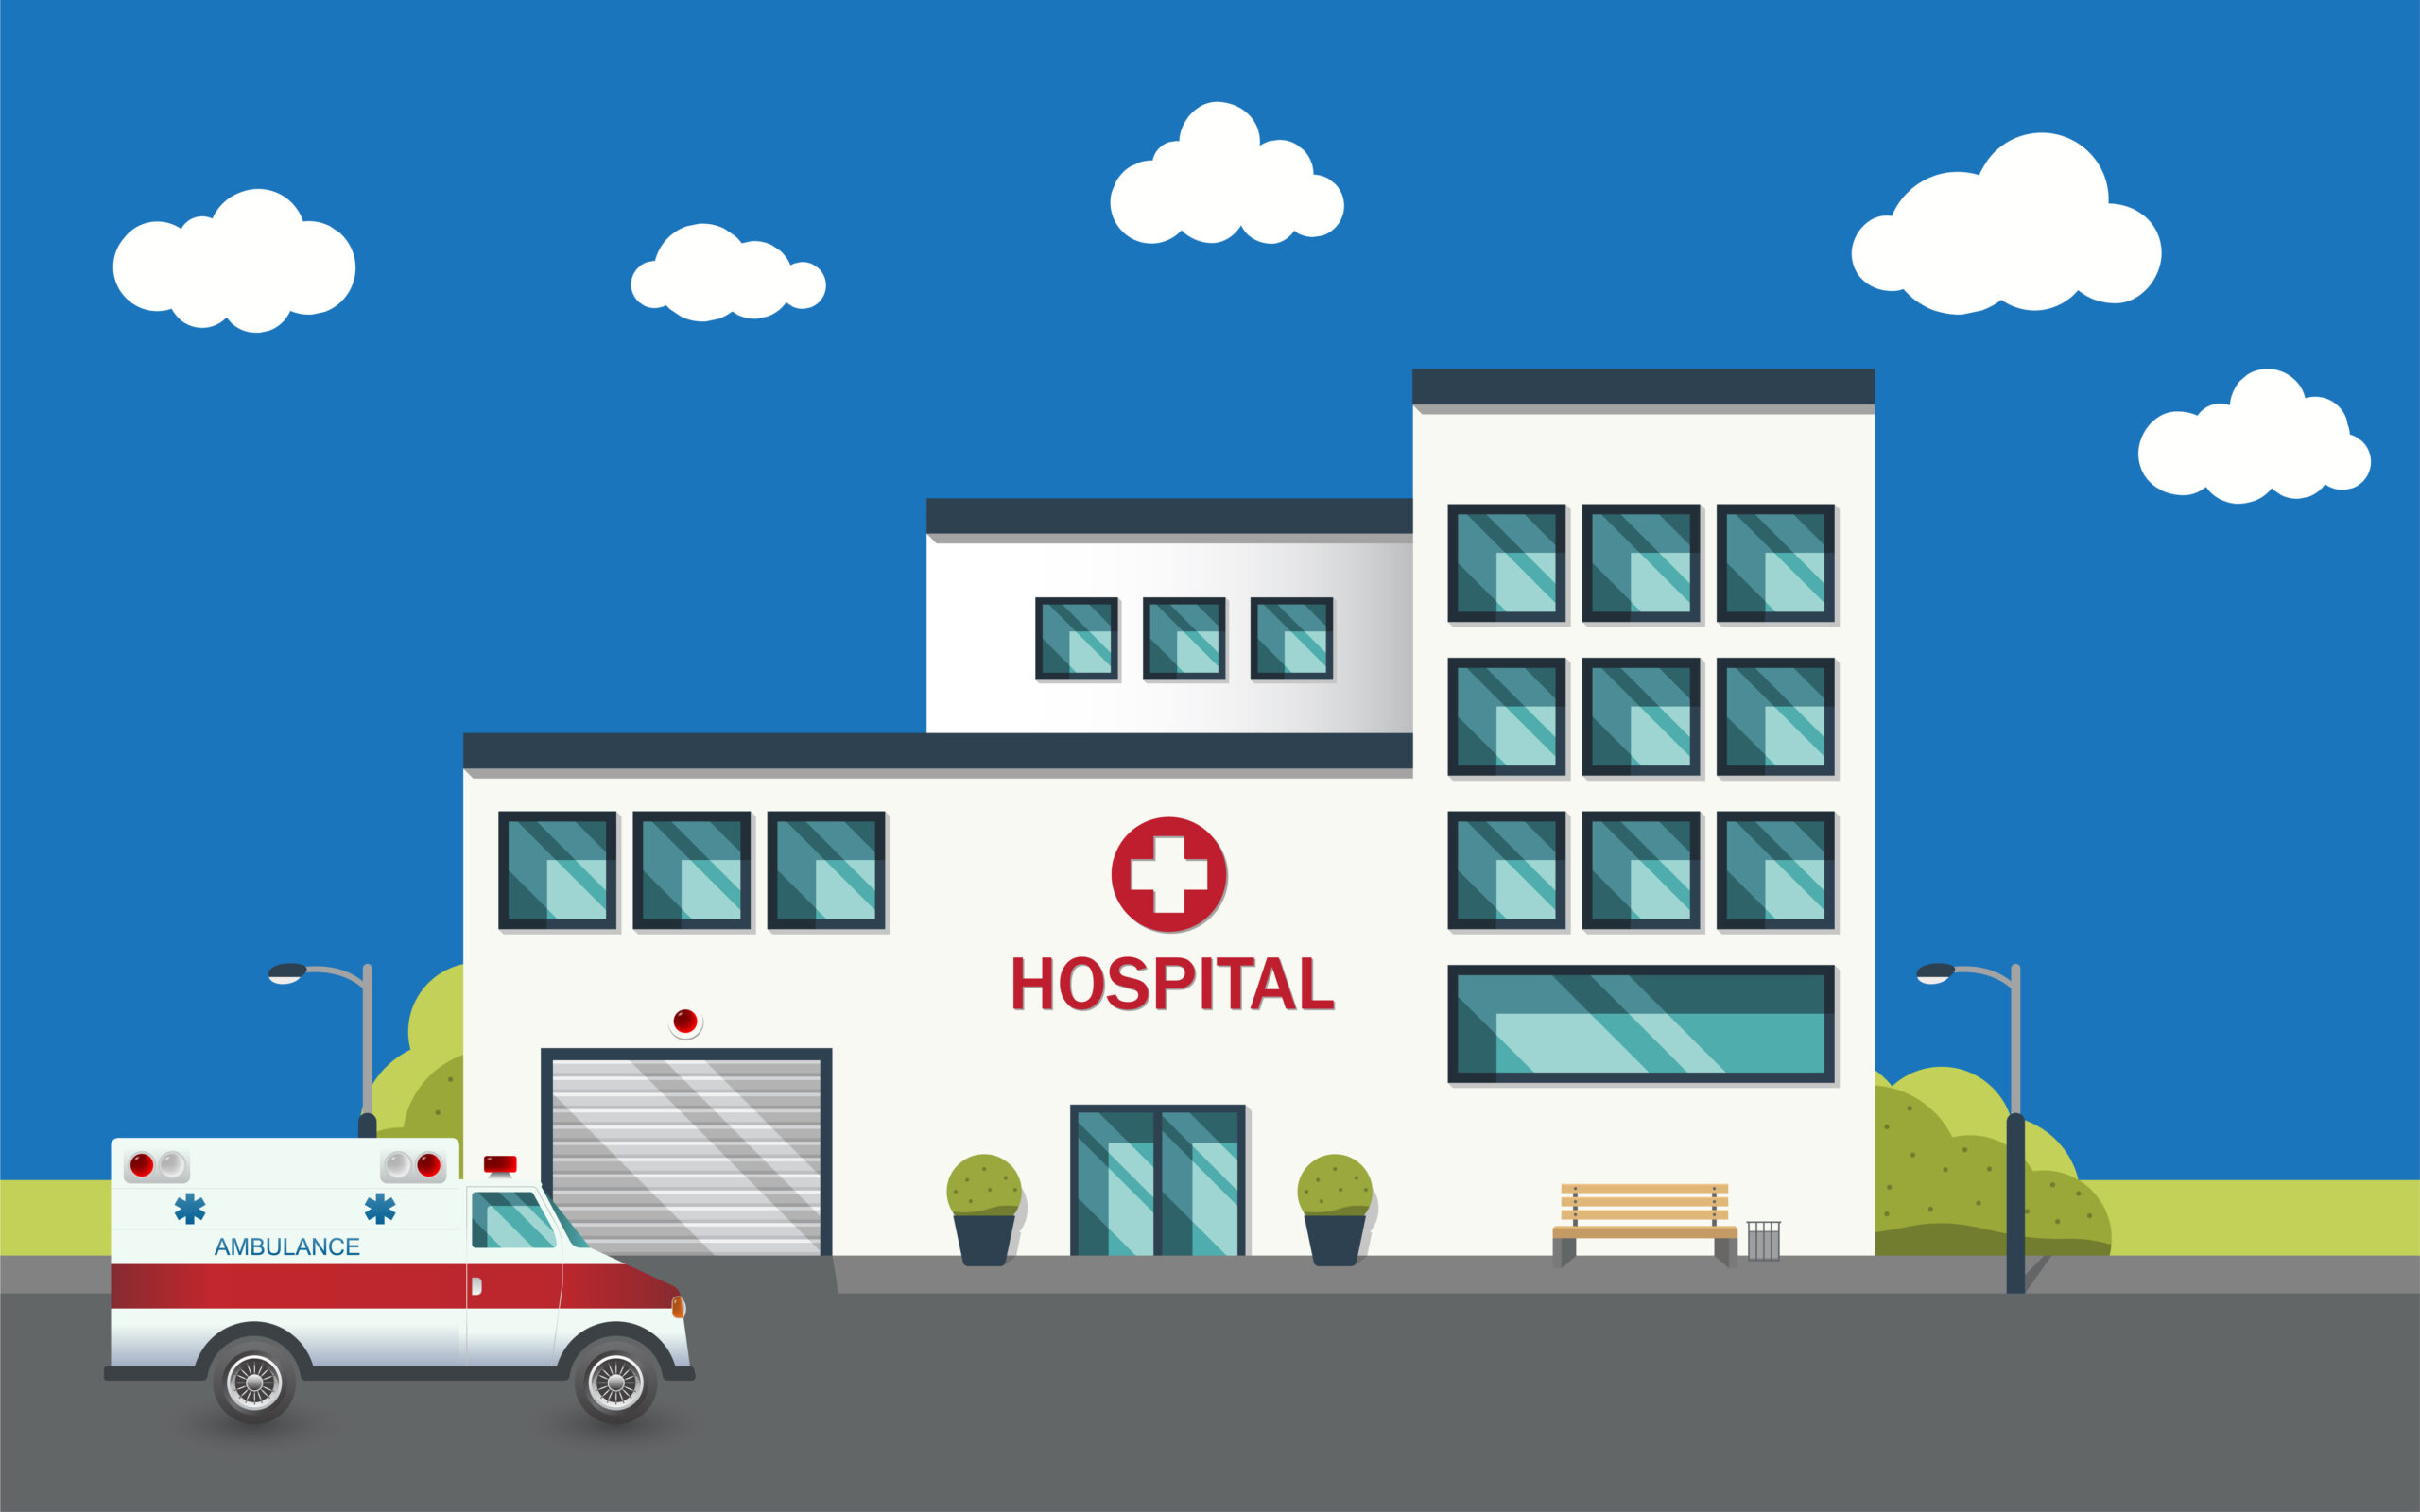 Panoramic background with hospital building and ambulance car in flat style. Medical concept, vector illustration.